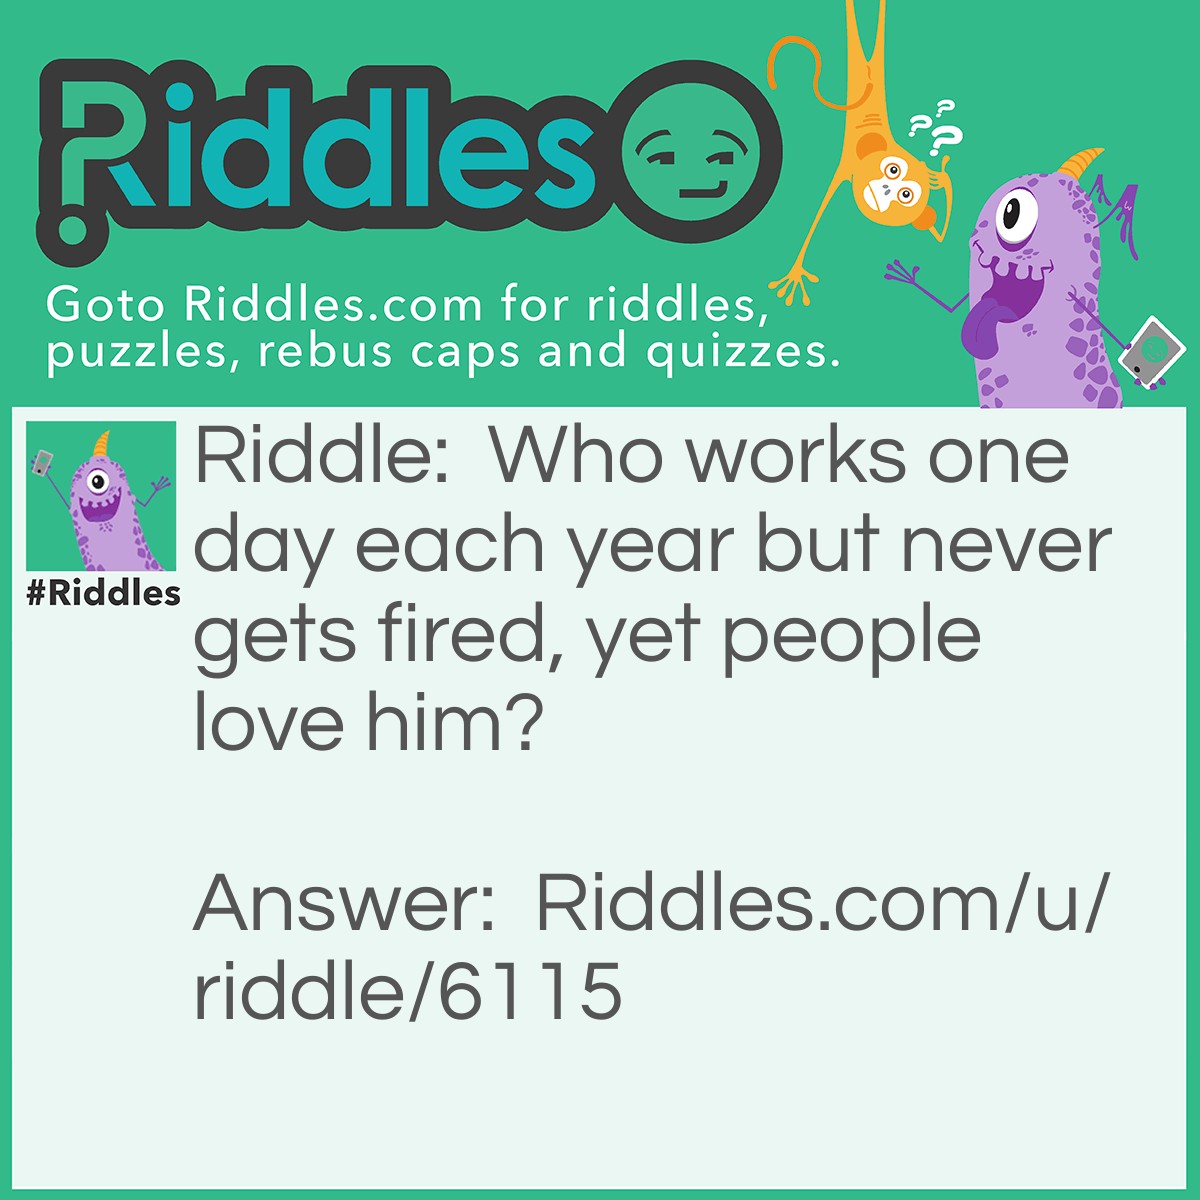 Riddle: Who works one day each year but never gets fired, yet people love him? Answer: Santa Claus.